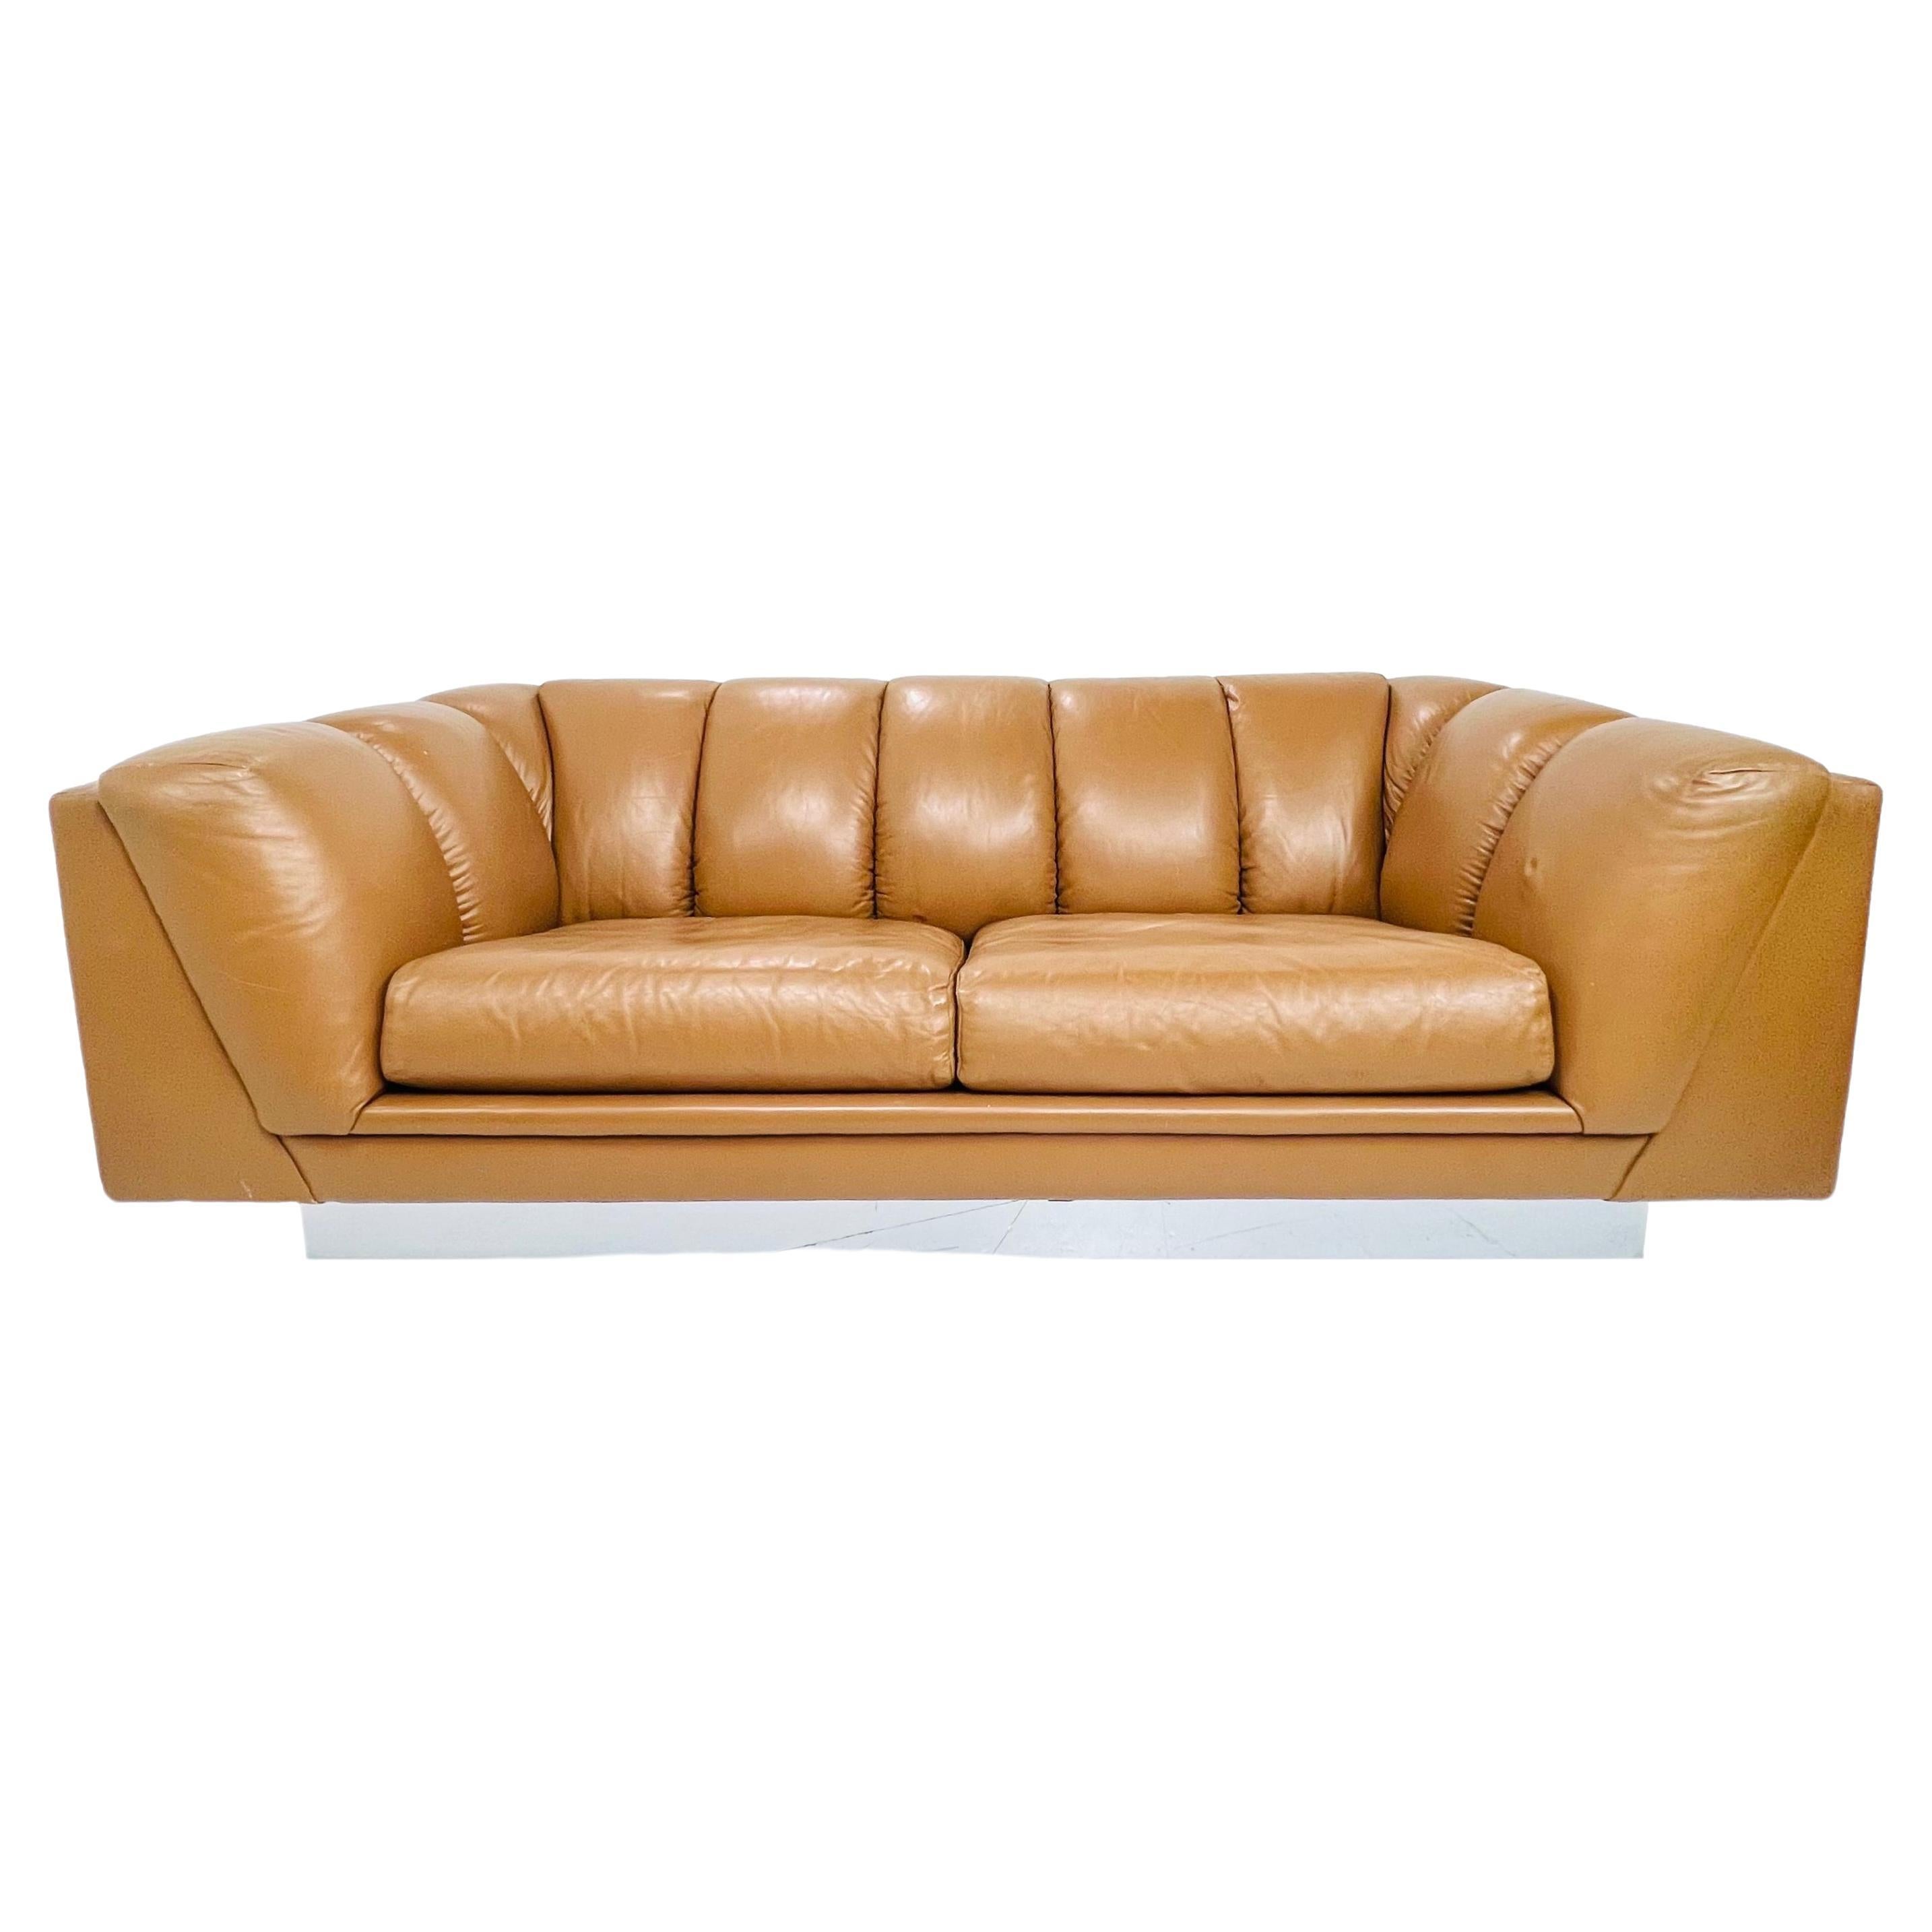 1970's Channeled Leather Sofa by Metropolitan For Sale